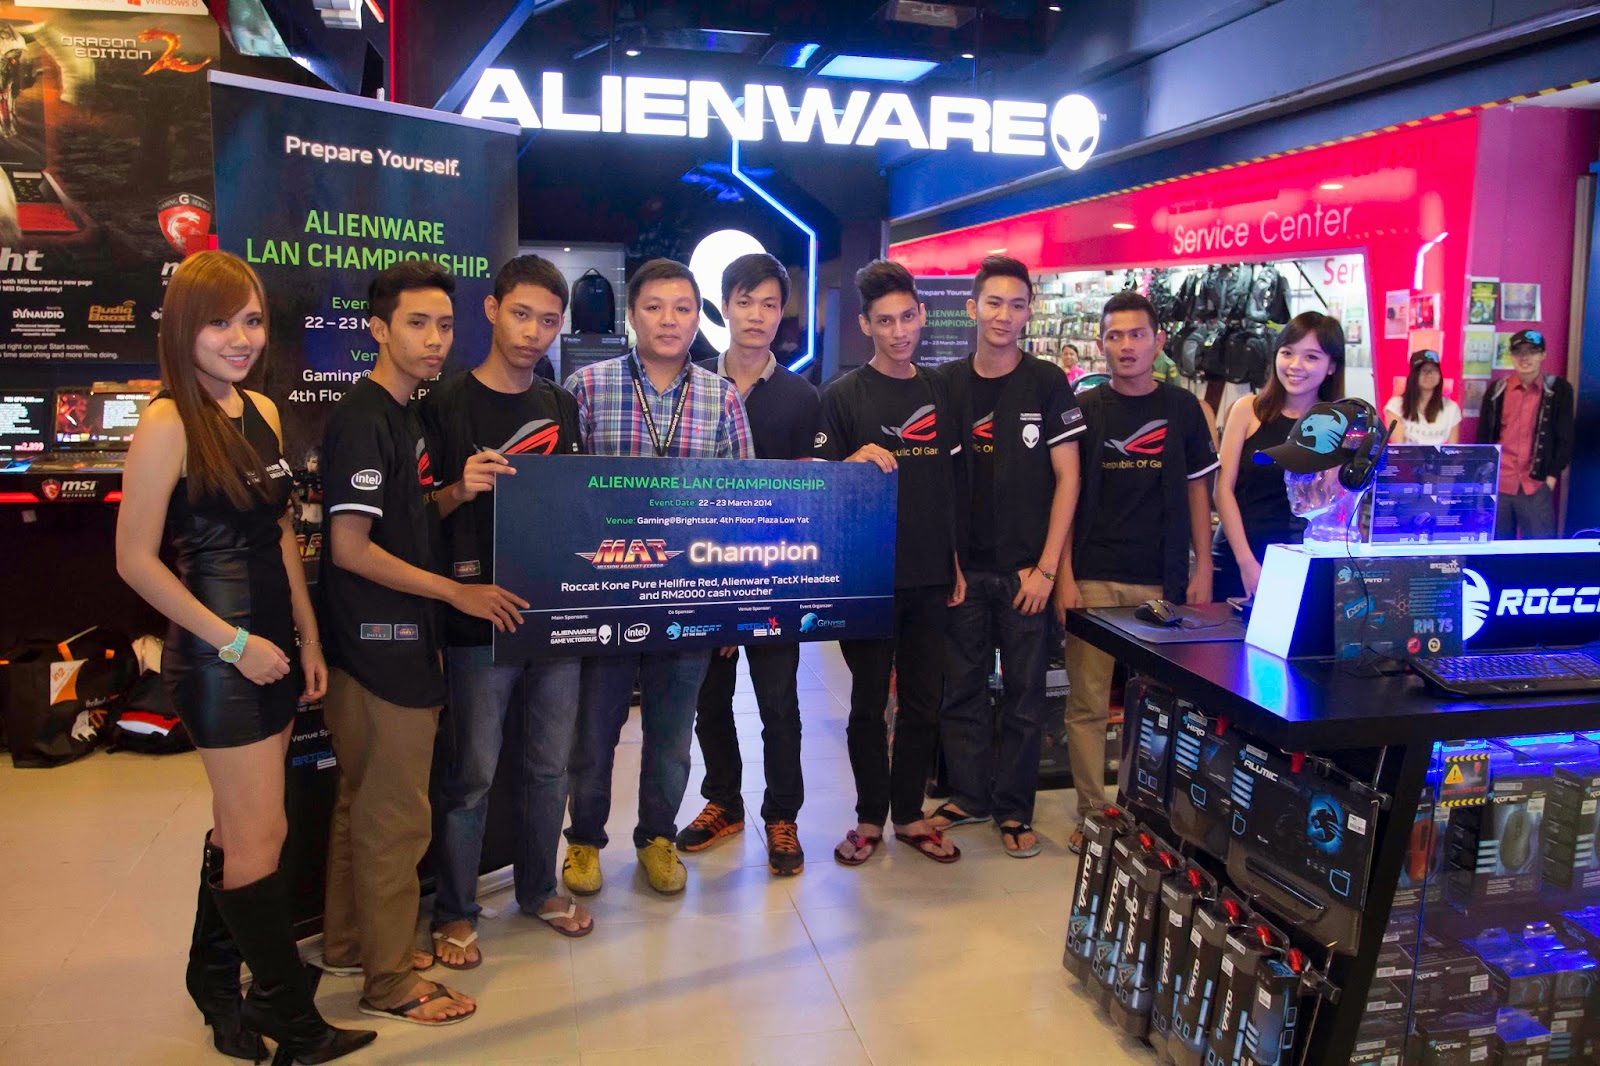 Malaysia’s Leading Gamers Battle It Out at Alienware Tournament Alienware and Genysis Cyber E-sport Joined Forces for Alienware LAN Championship 8